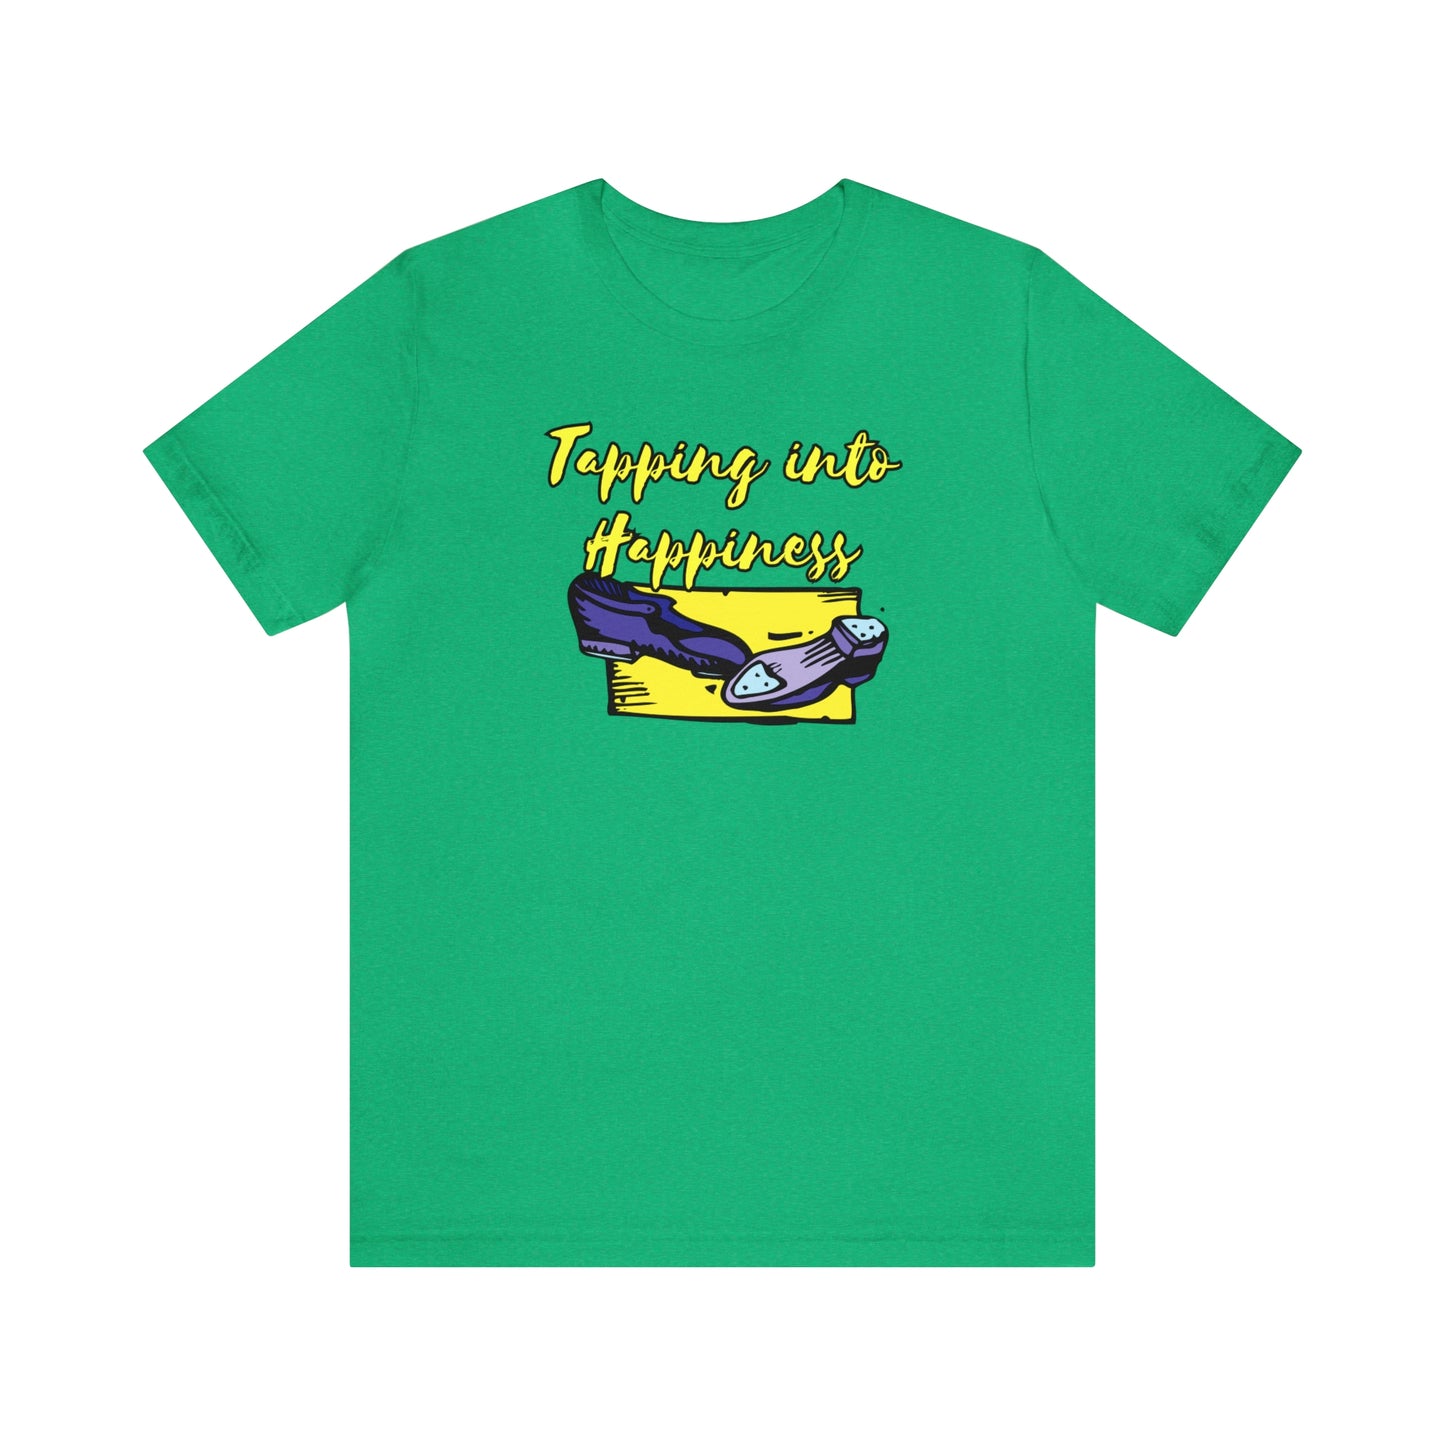 Unisex Tee - Tapping Into